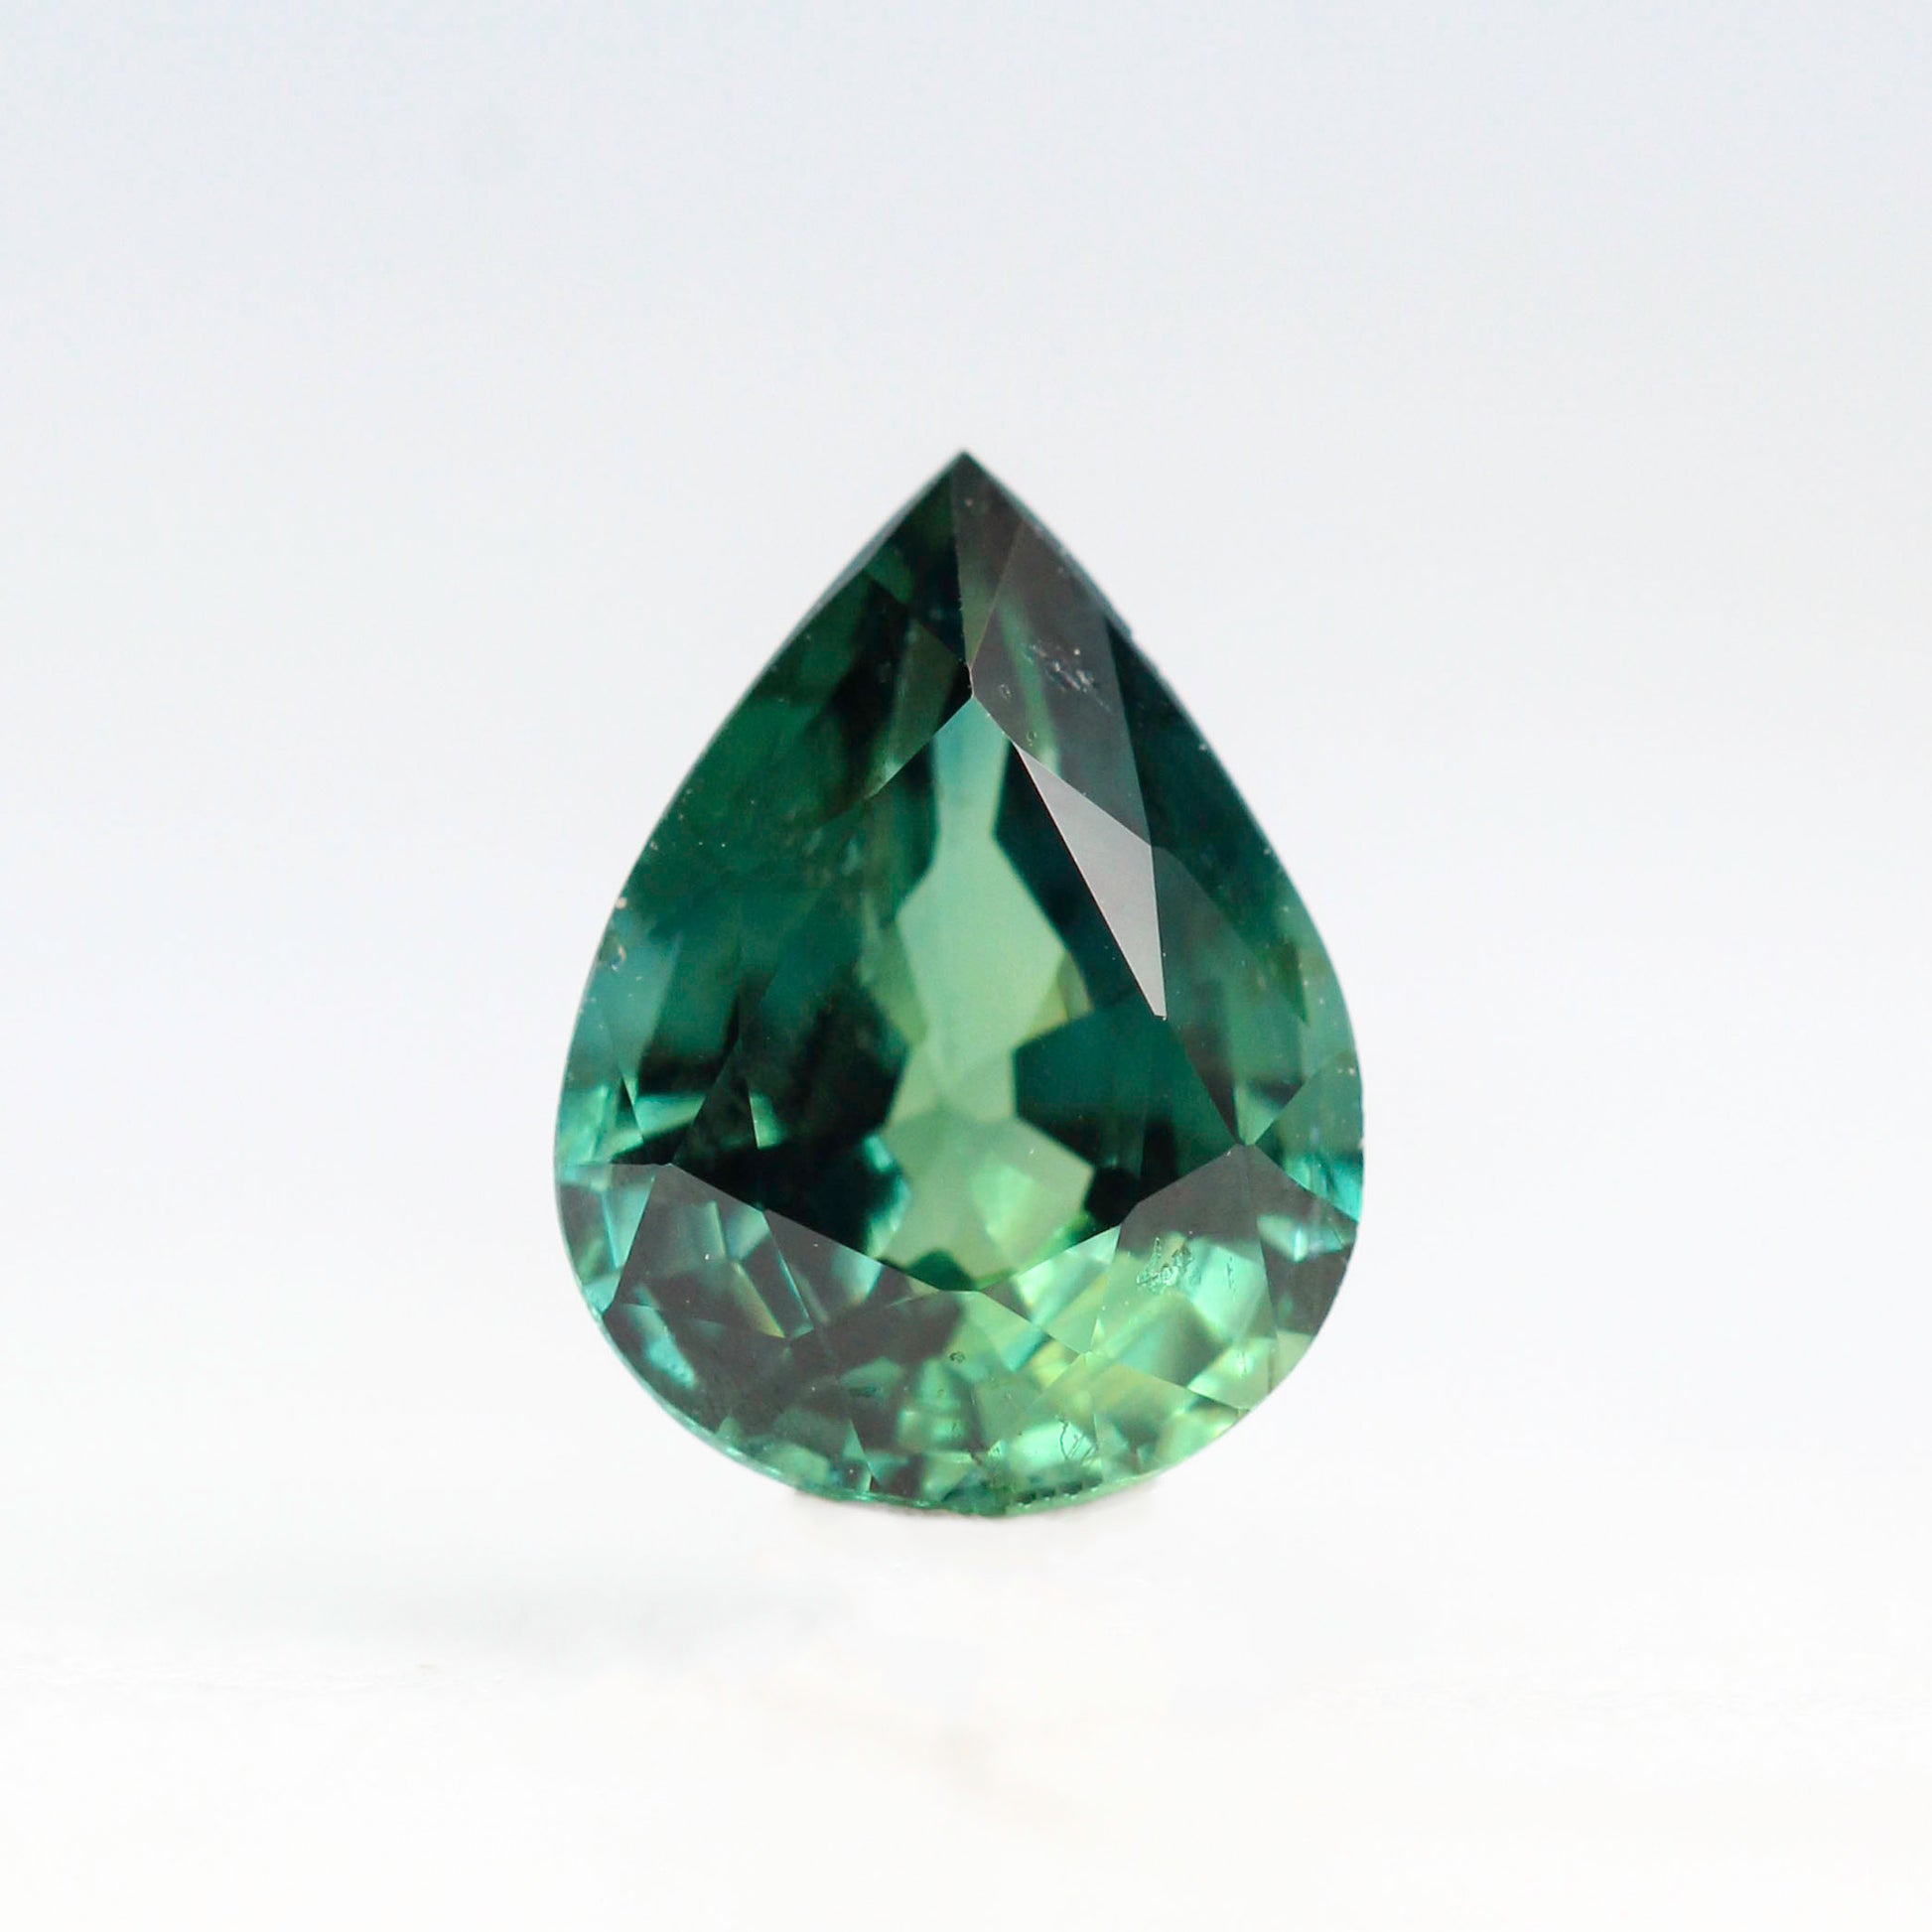 0.97 Carat Green Teal Pear Sapphire for Custom Work - Inventory Code GTPS097 - Midwinter Co. Alternative Bridal Rings and Modern Fine Jewelry